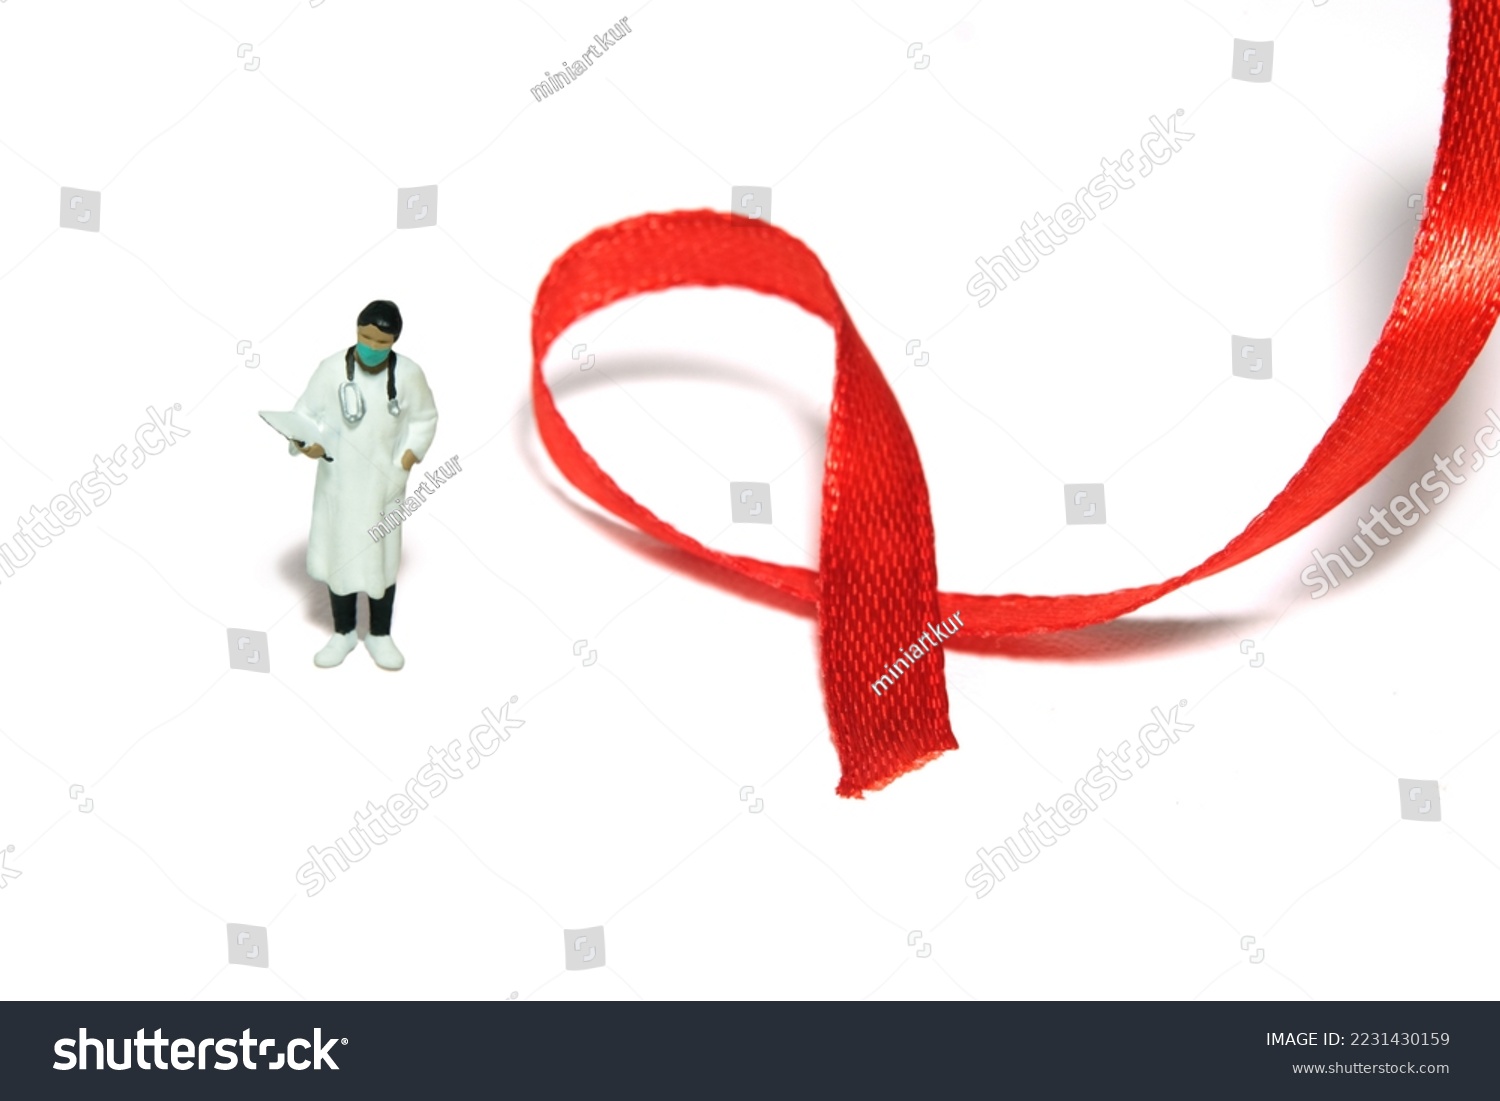 Miniature people figure toys photography. World AIDS Day awareness day concept. Girl woman doctor standing beside red ribbon. Isolated on white background. Image photo #2231430159